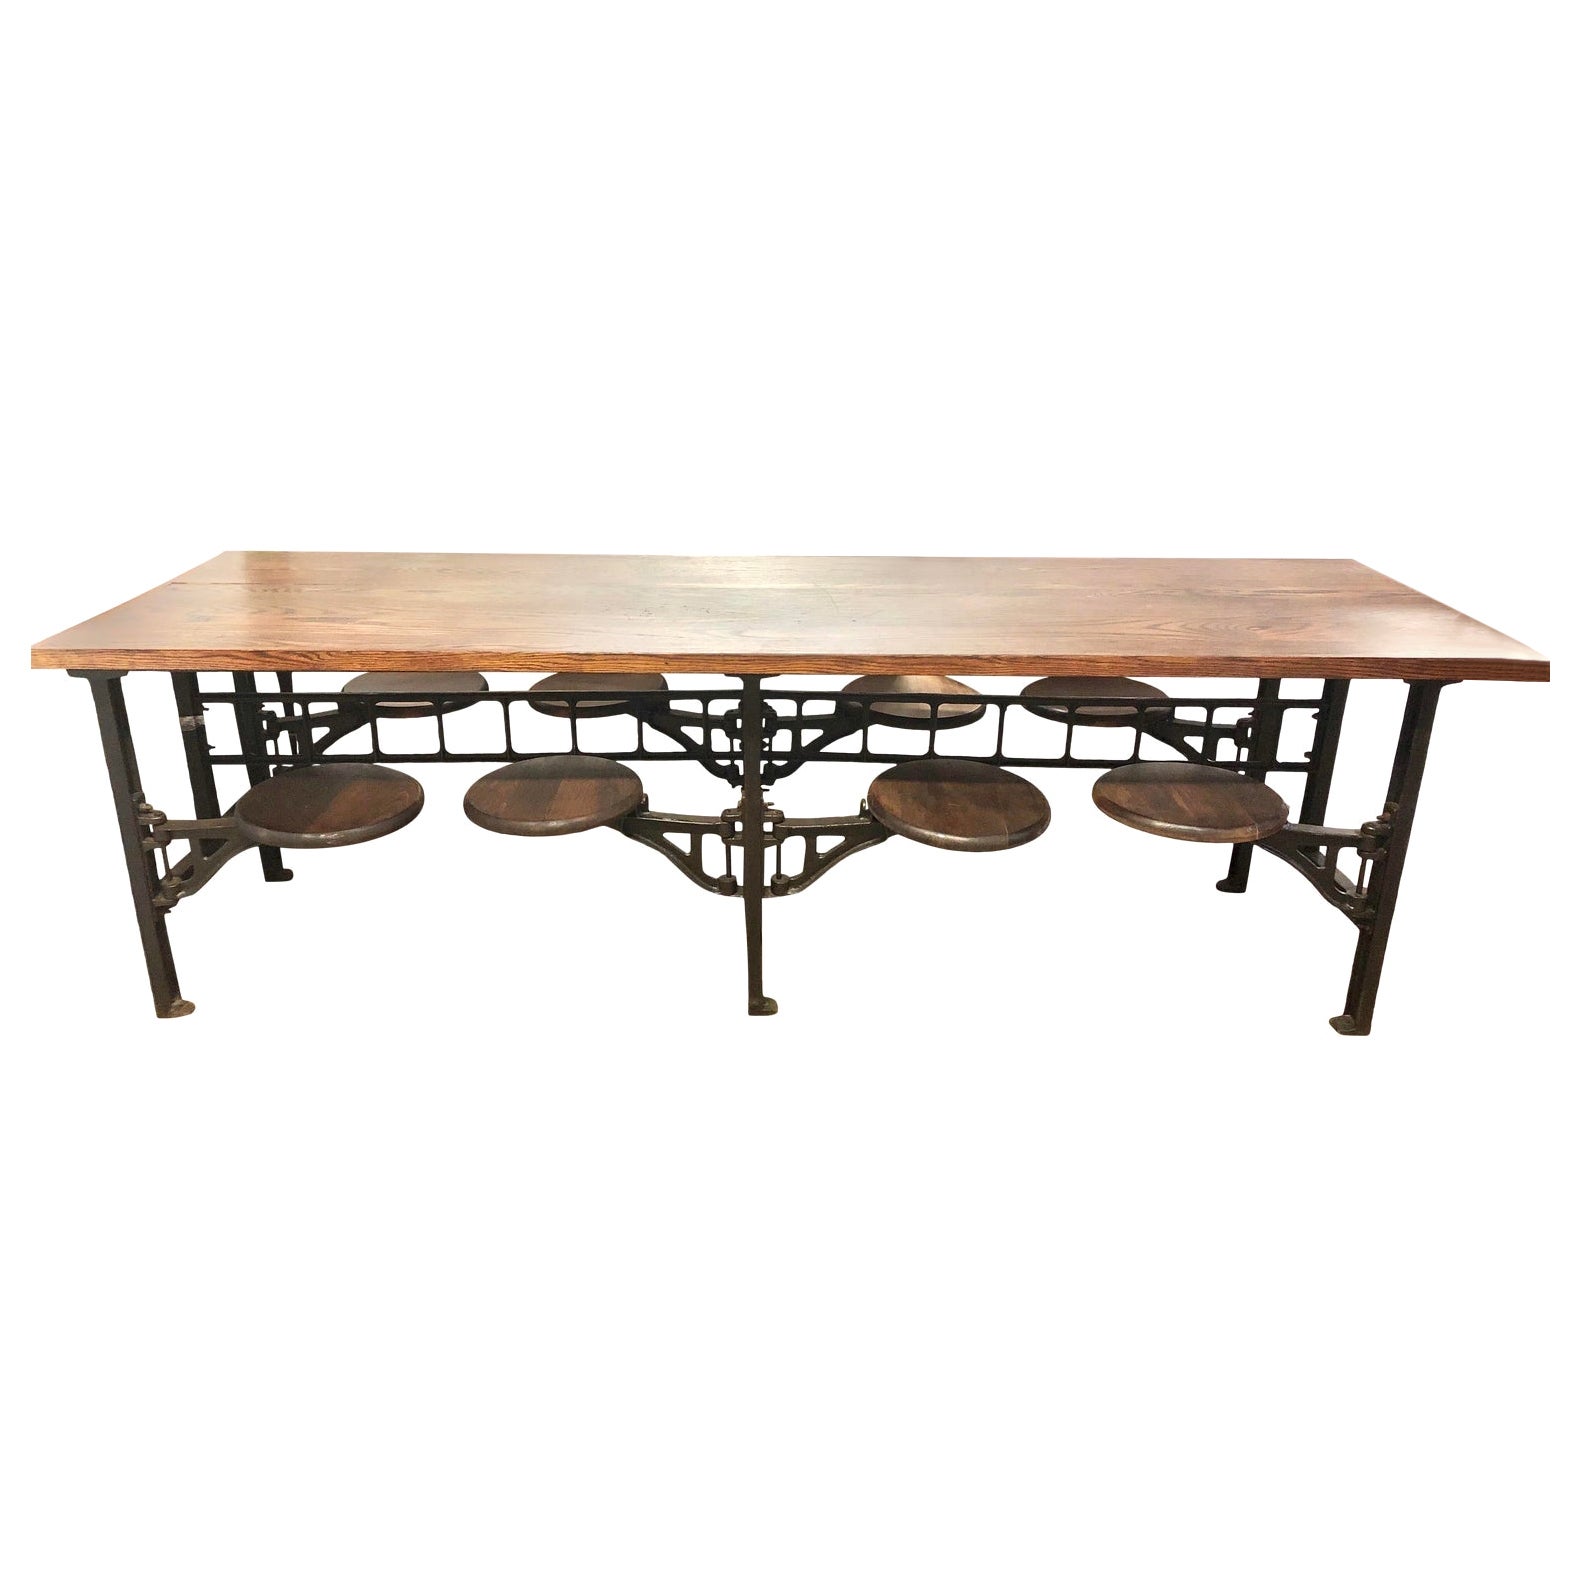 1920s American Table 8 Swing Out Lunchroom Table